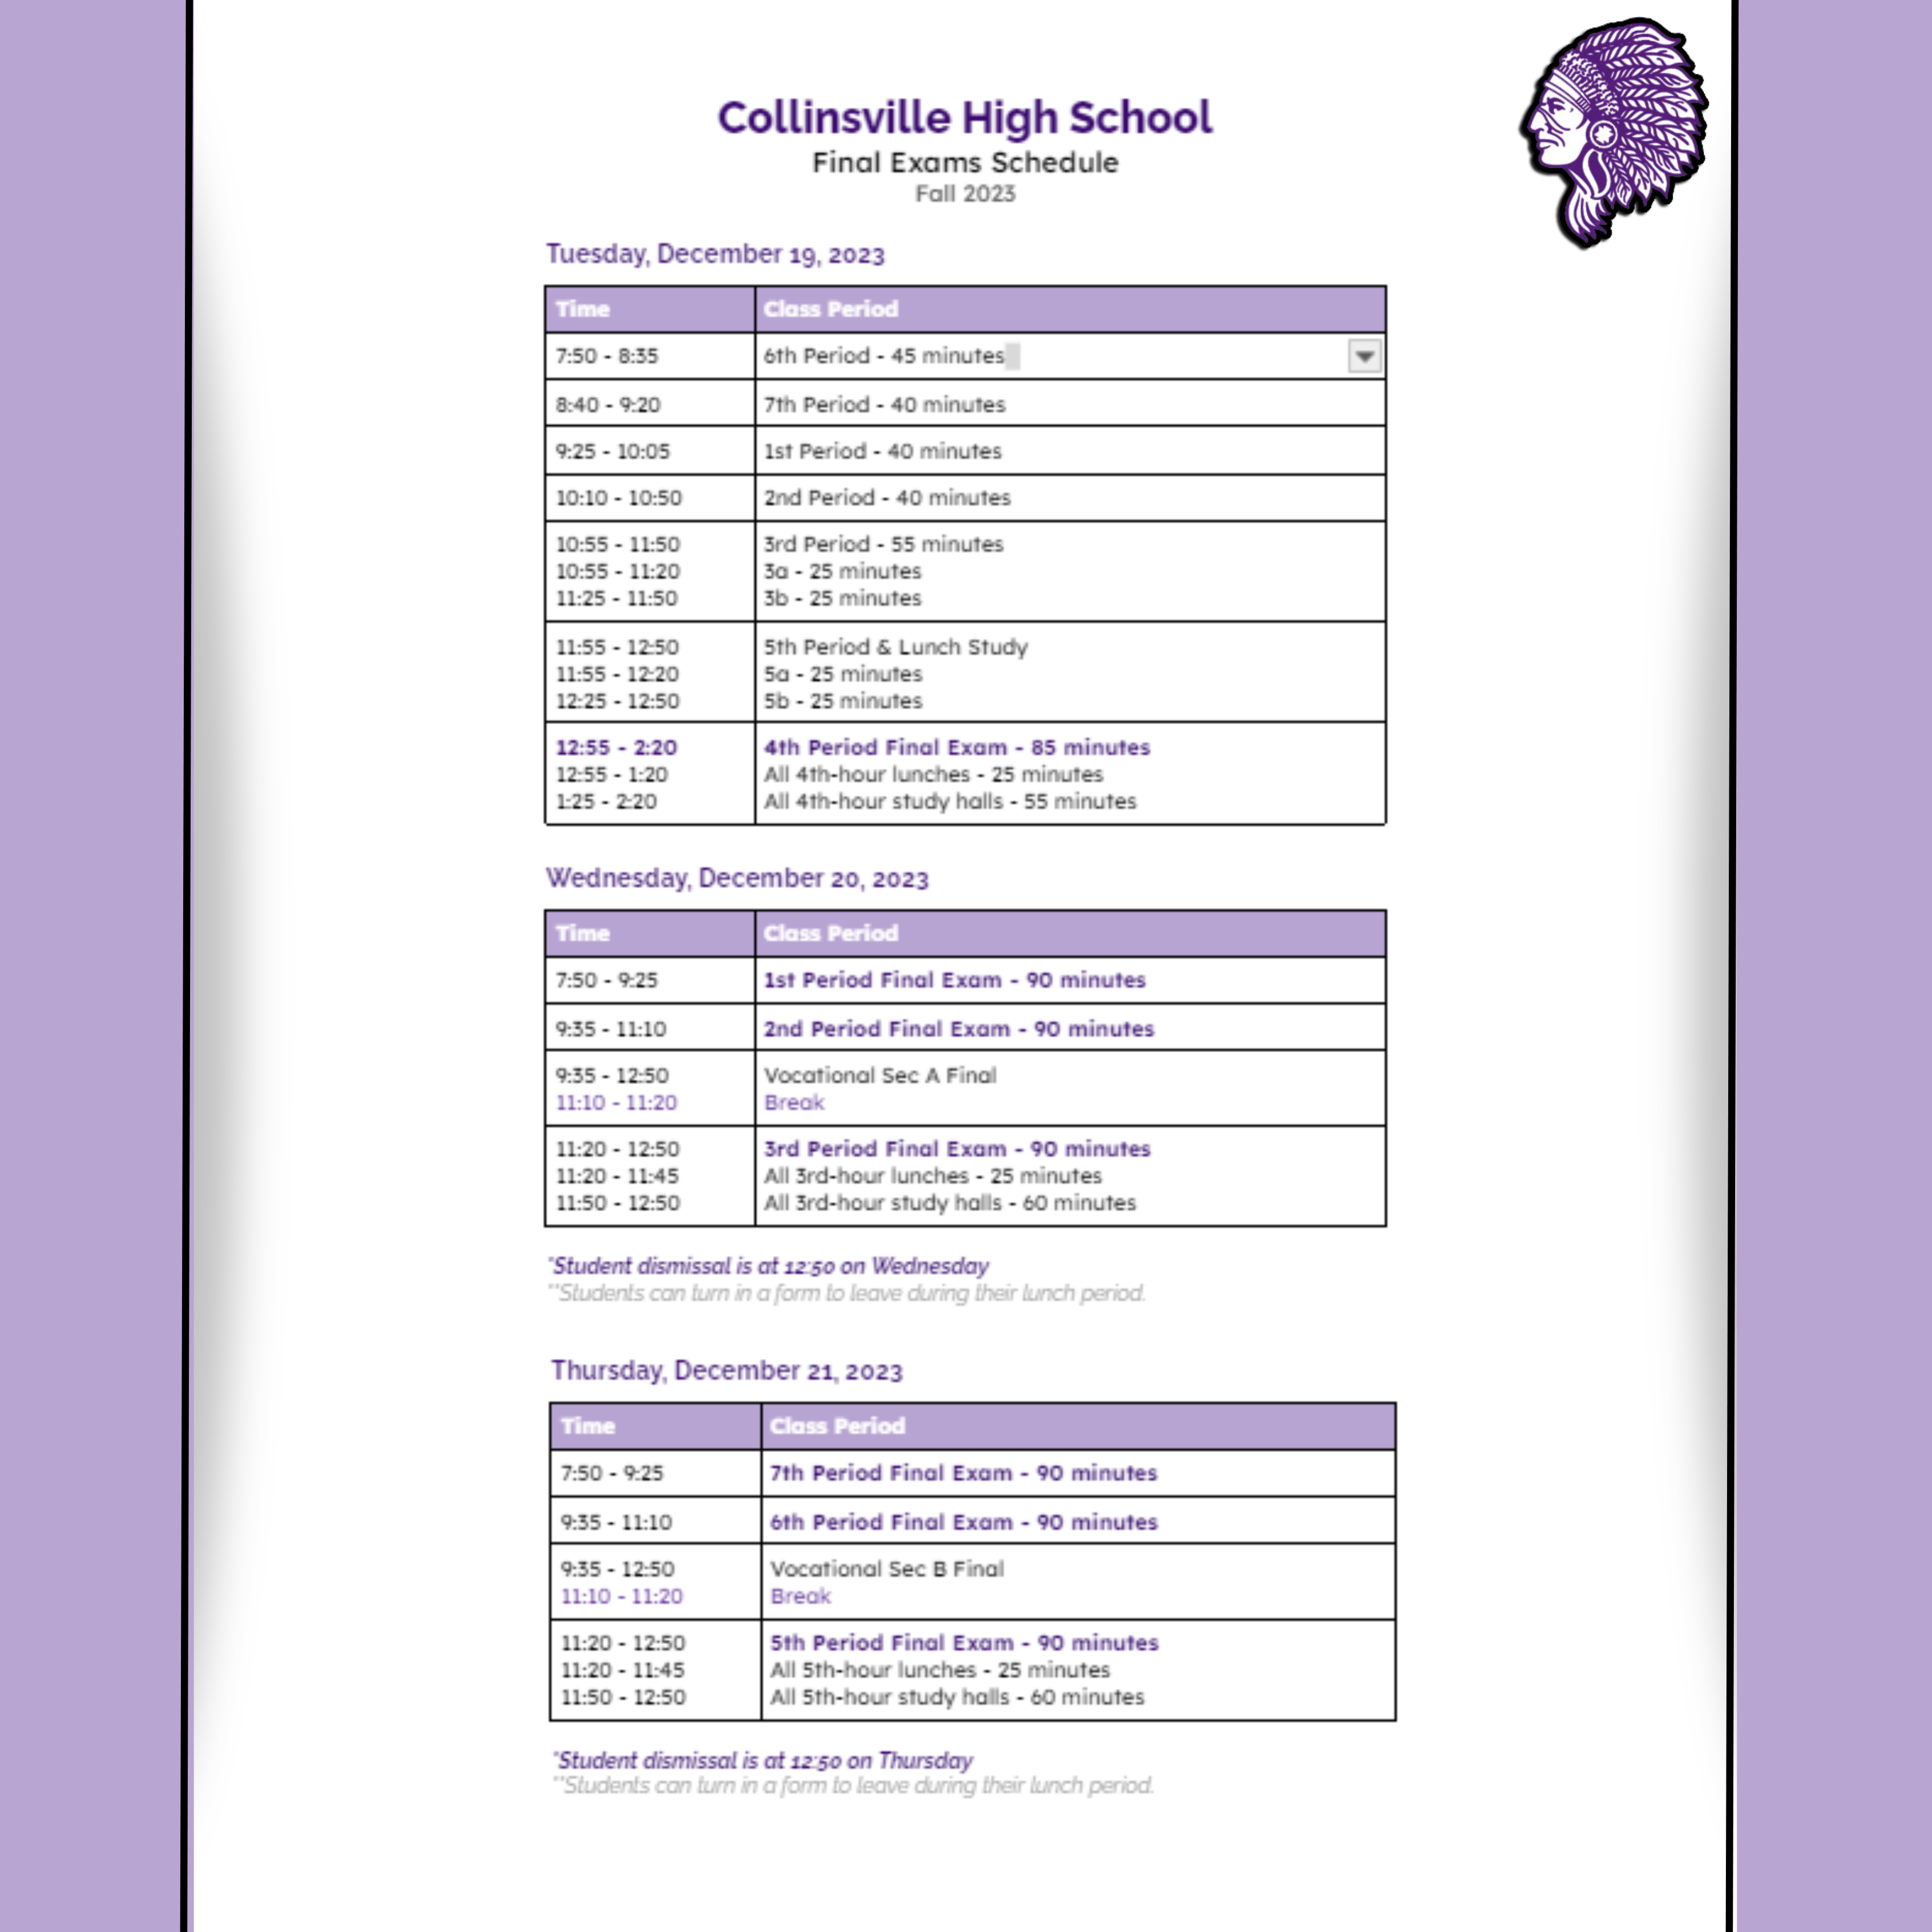 Collinsville High School finals schedule for first semester of the 23-24 school year 